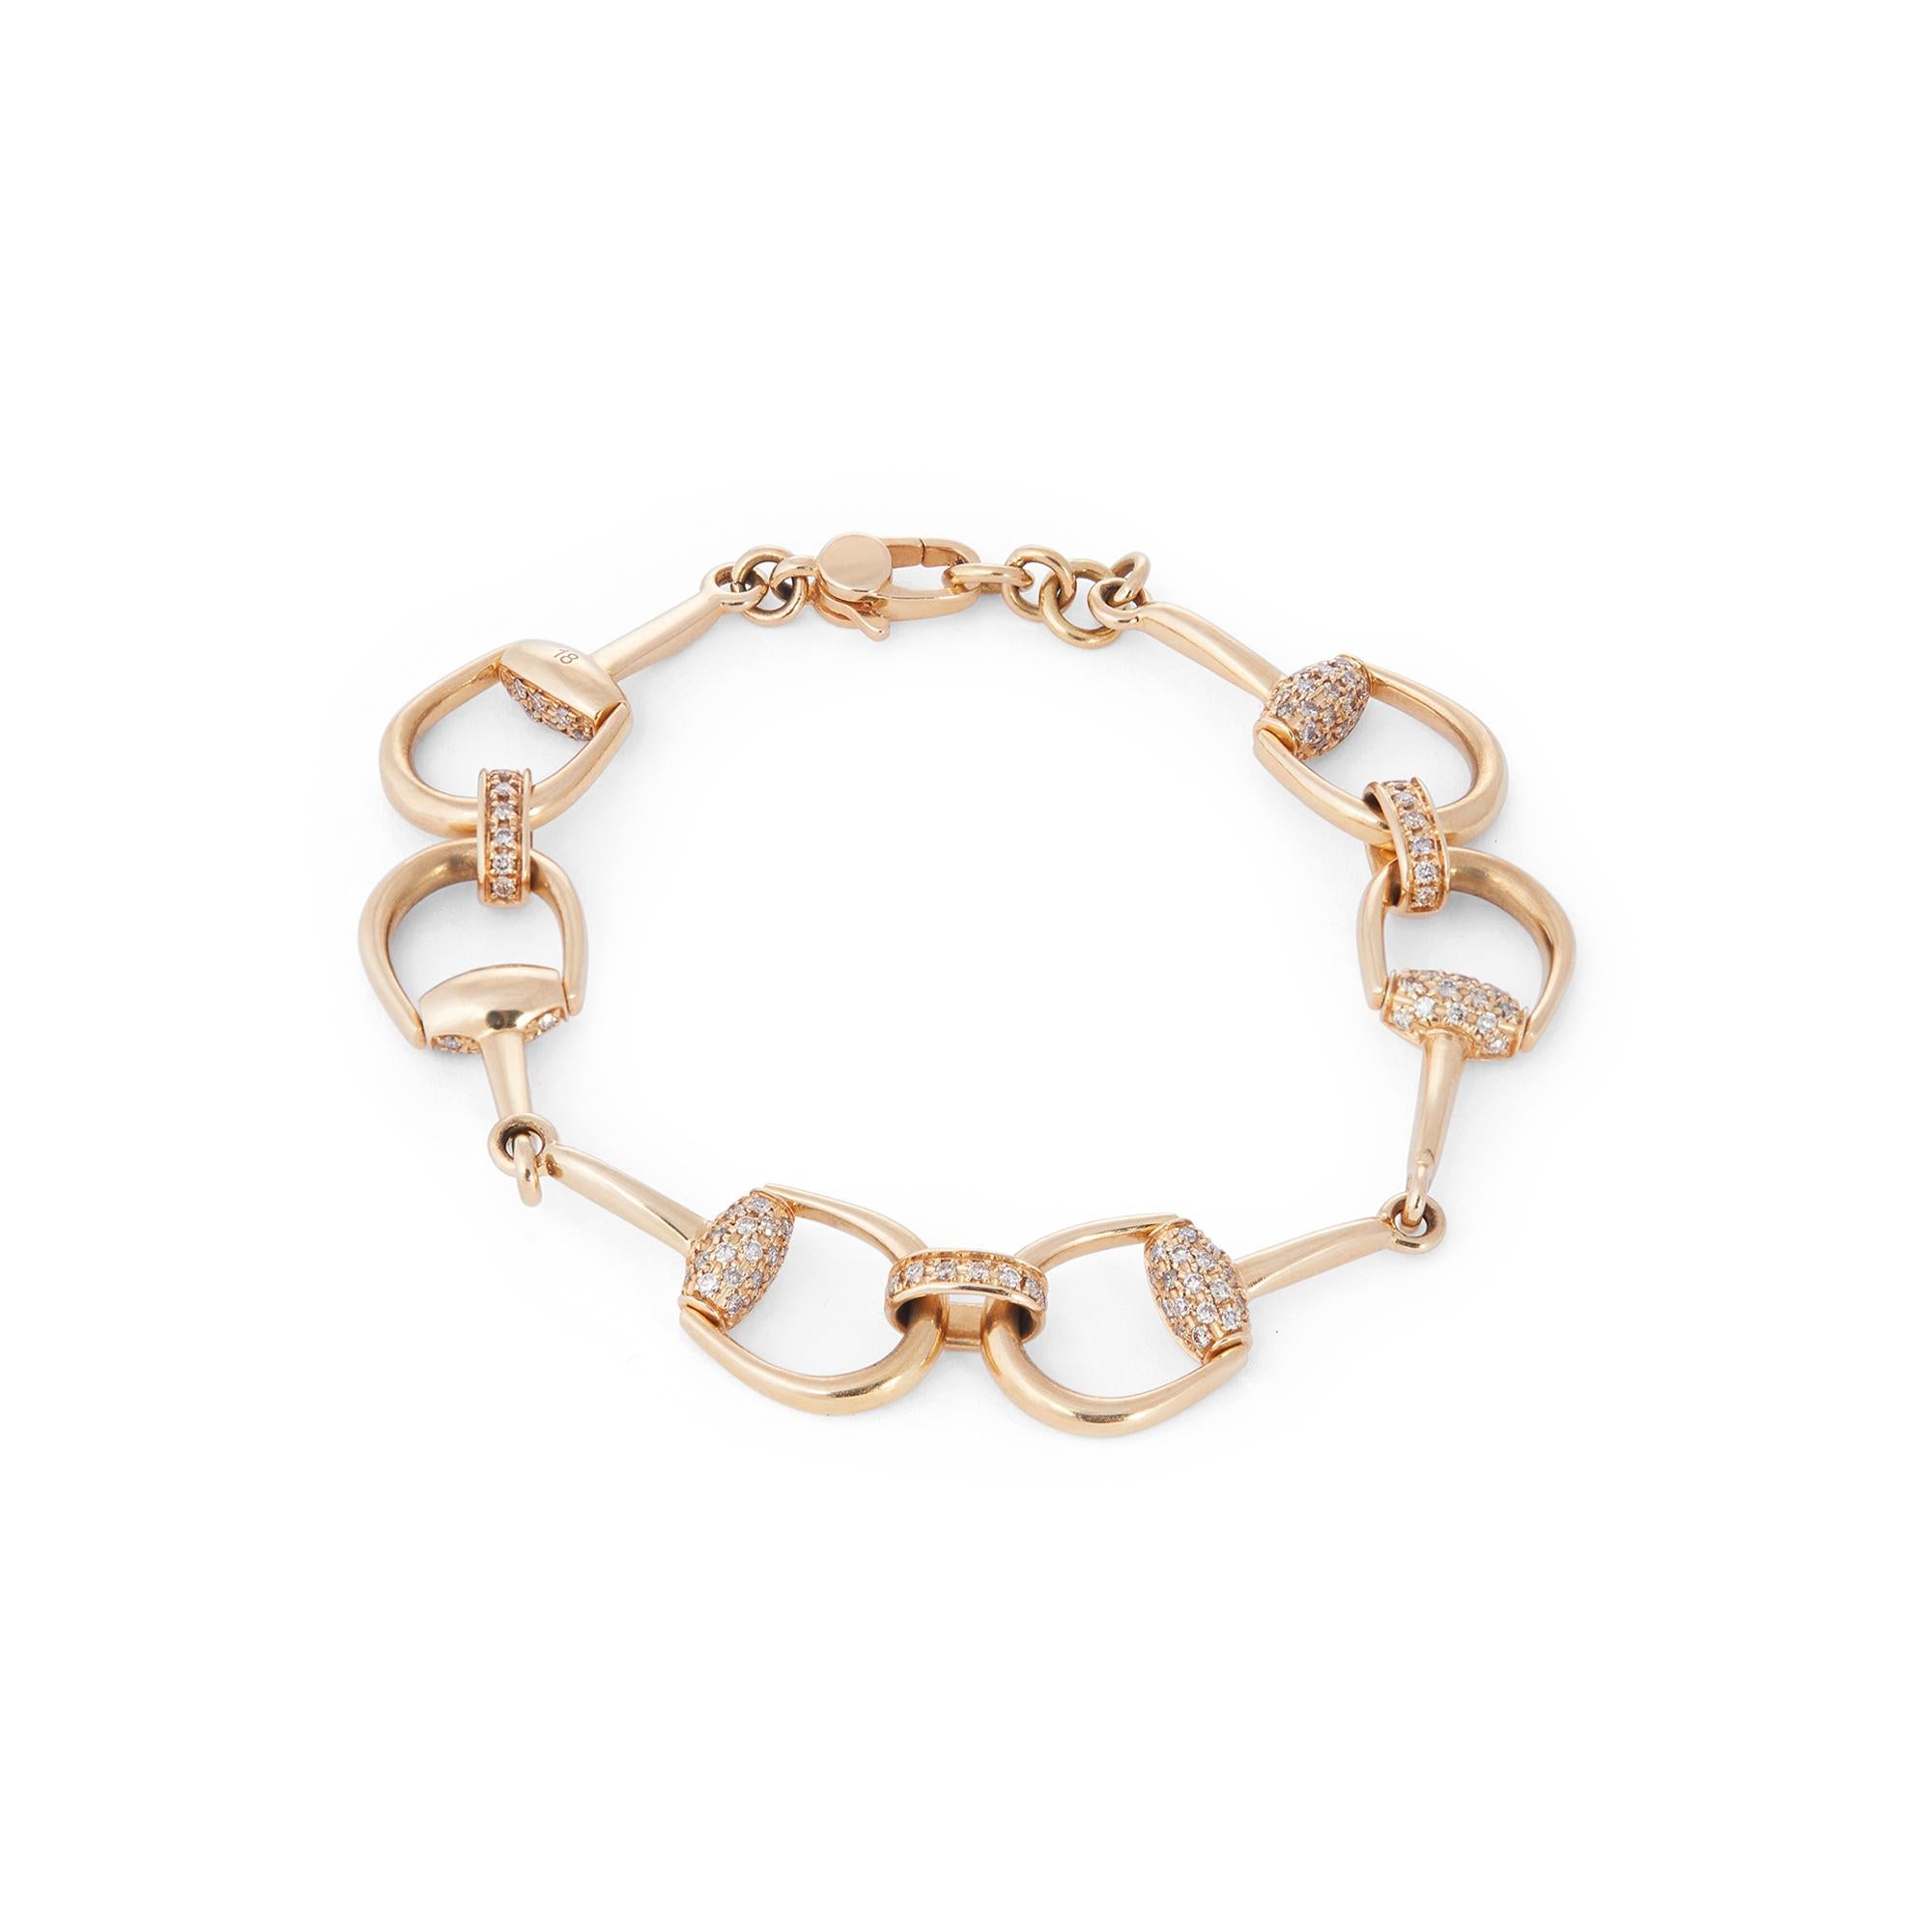 Authentic Gucci bracelet crafted in 18 karat yellow gold.  Featuring three sets of interlocking horsebit shaped links that are pave set with approximately 1.05 karats of round brilliant cut diamonds.  The bracelet measures 7 3/4 inches in length and